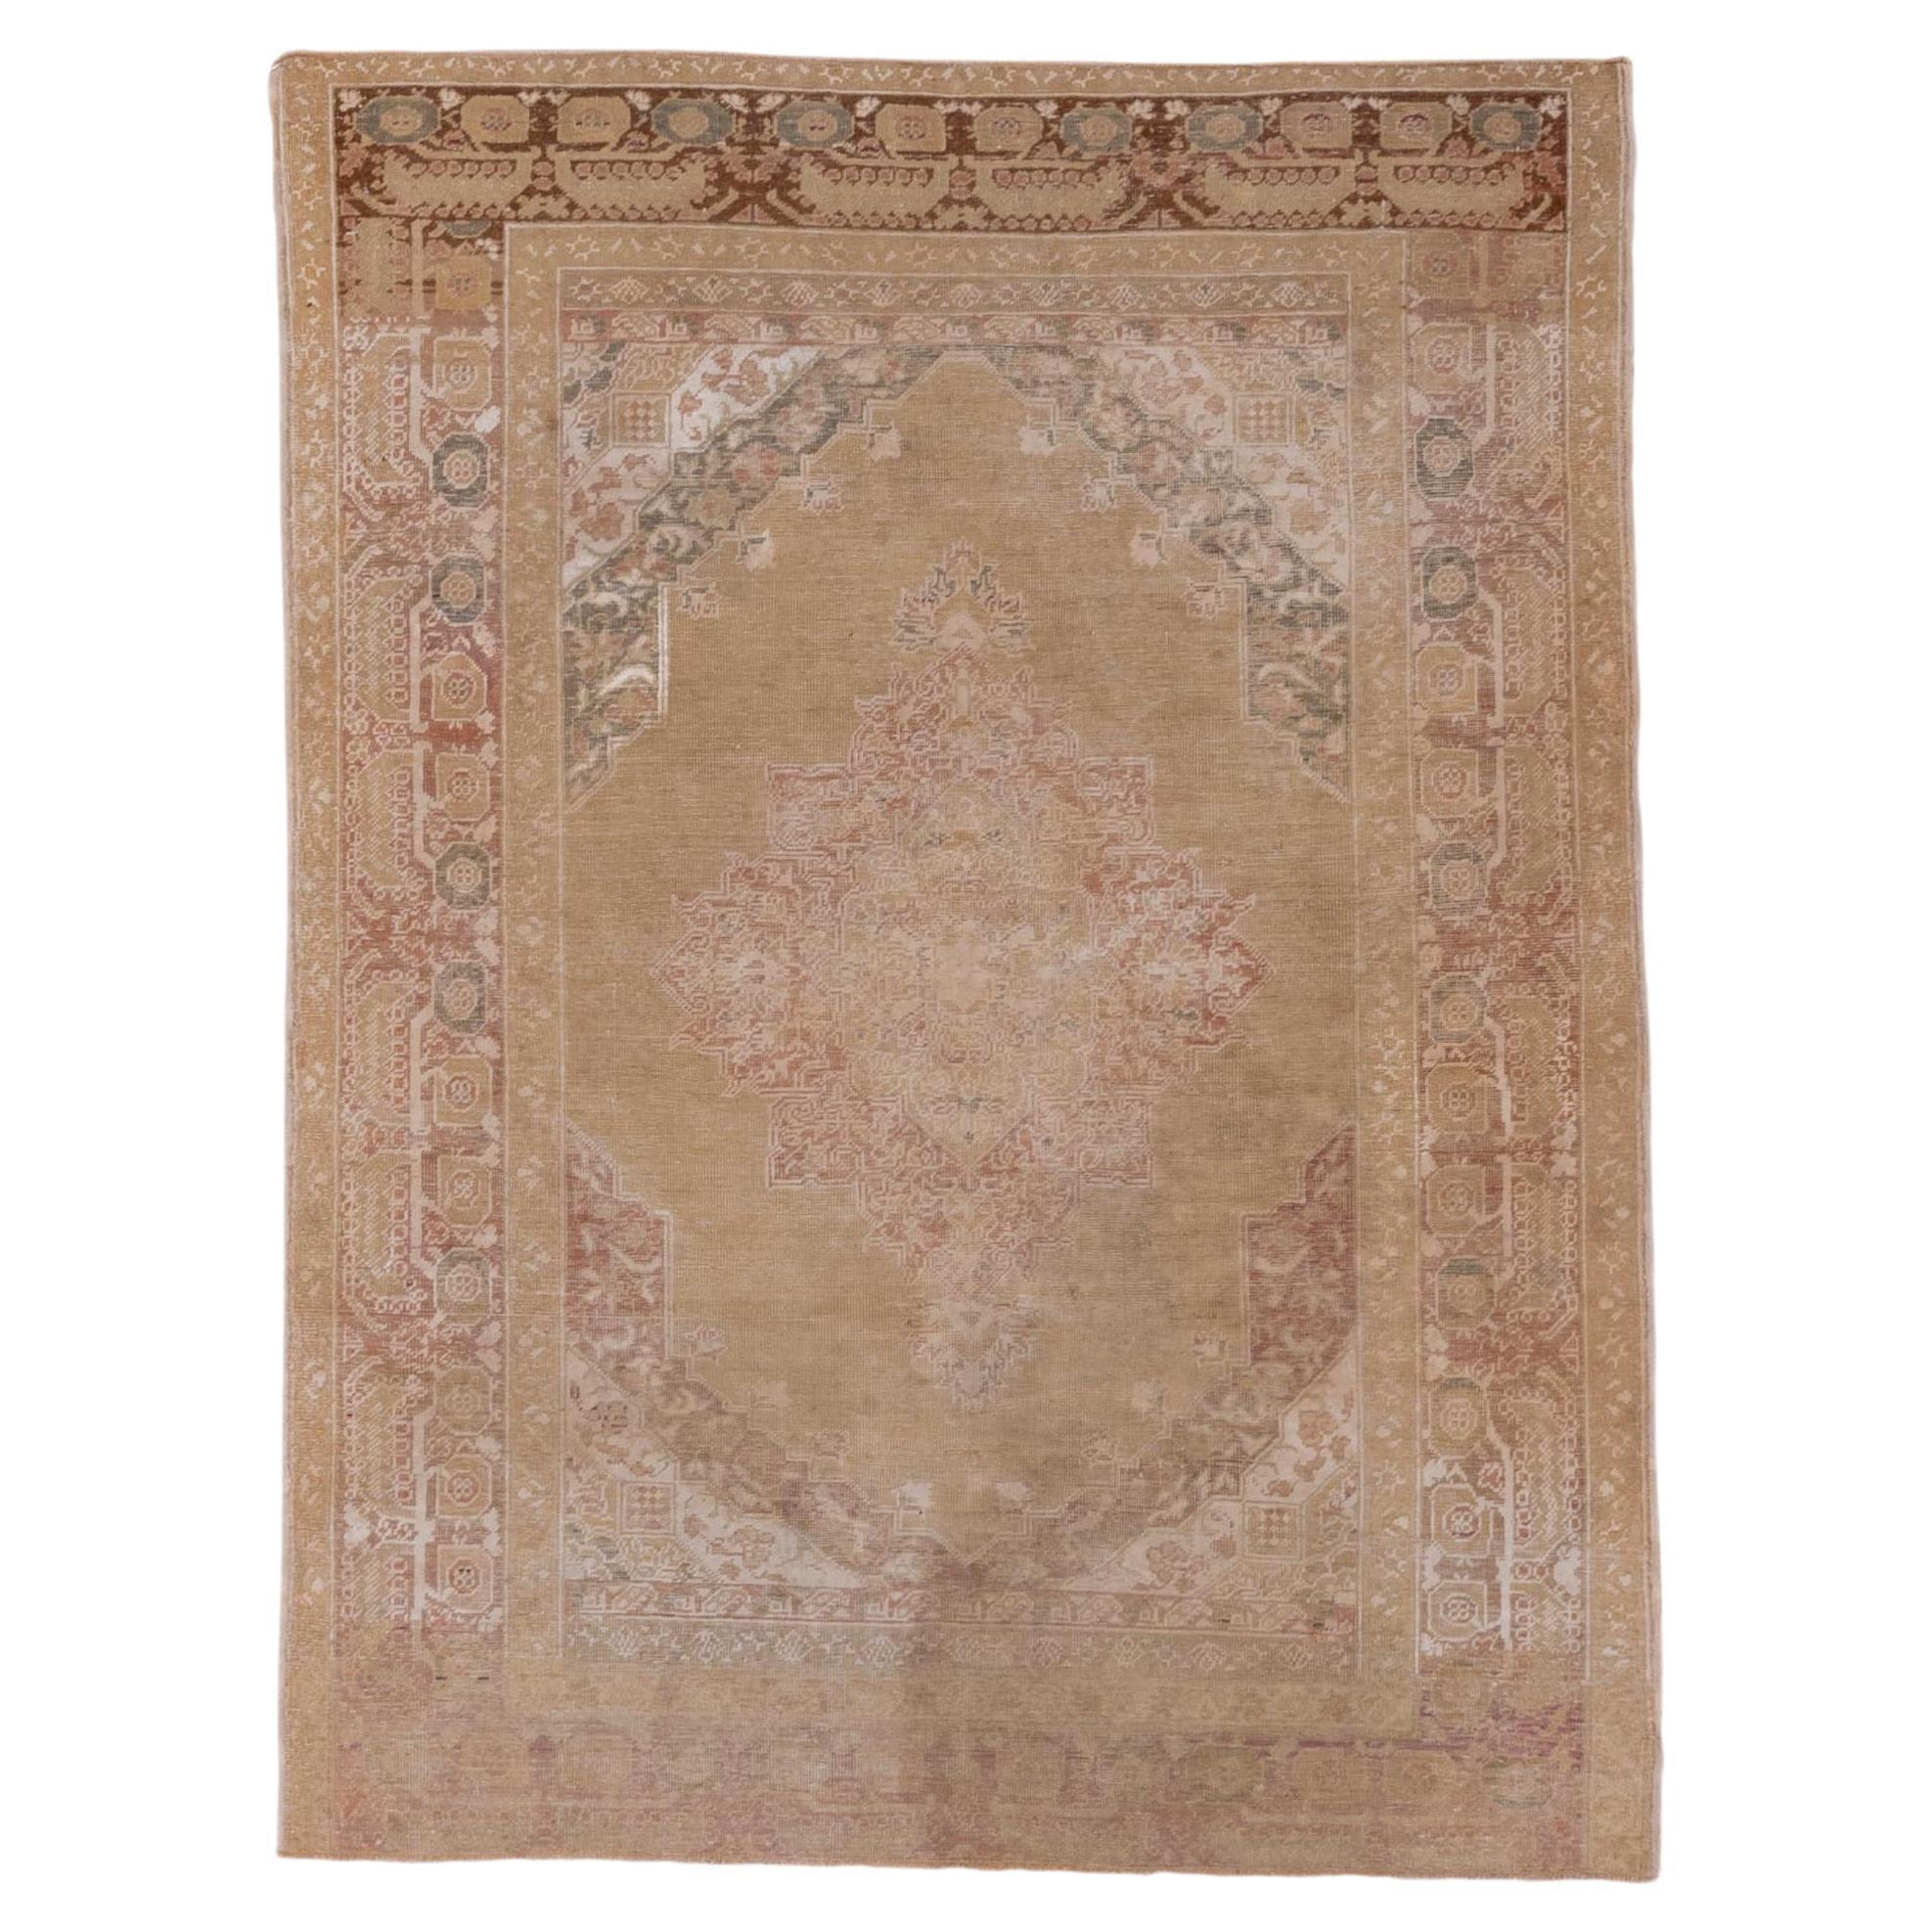 Kaisary Rug in Golden Sand in Almost Square 